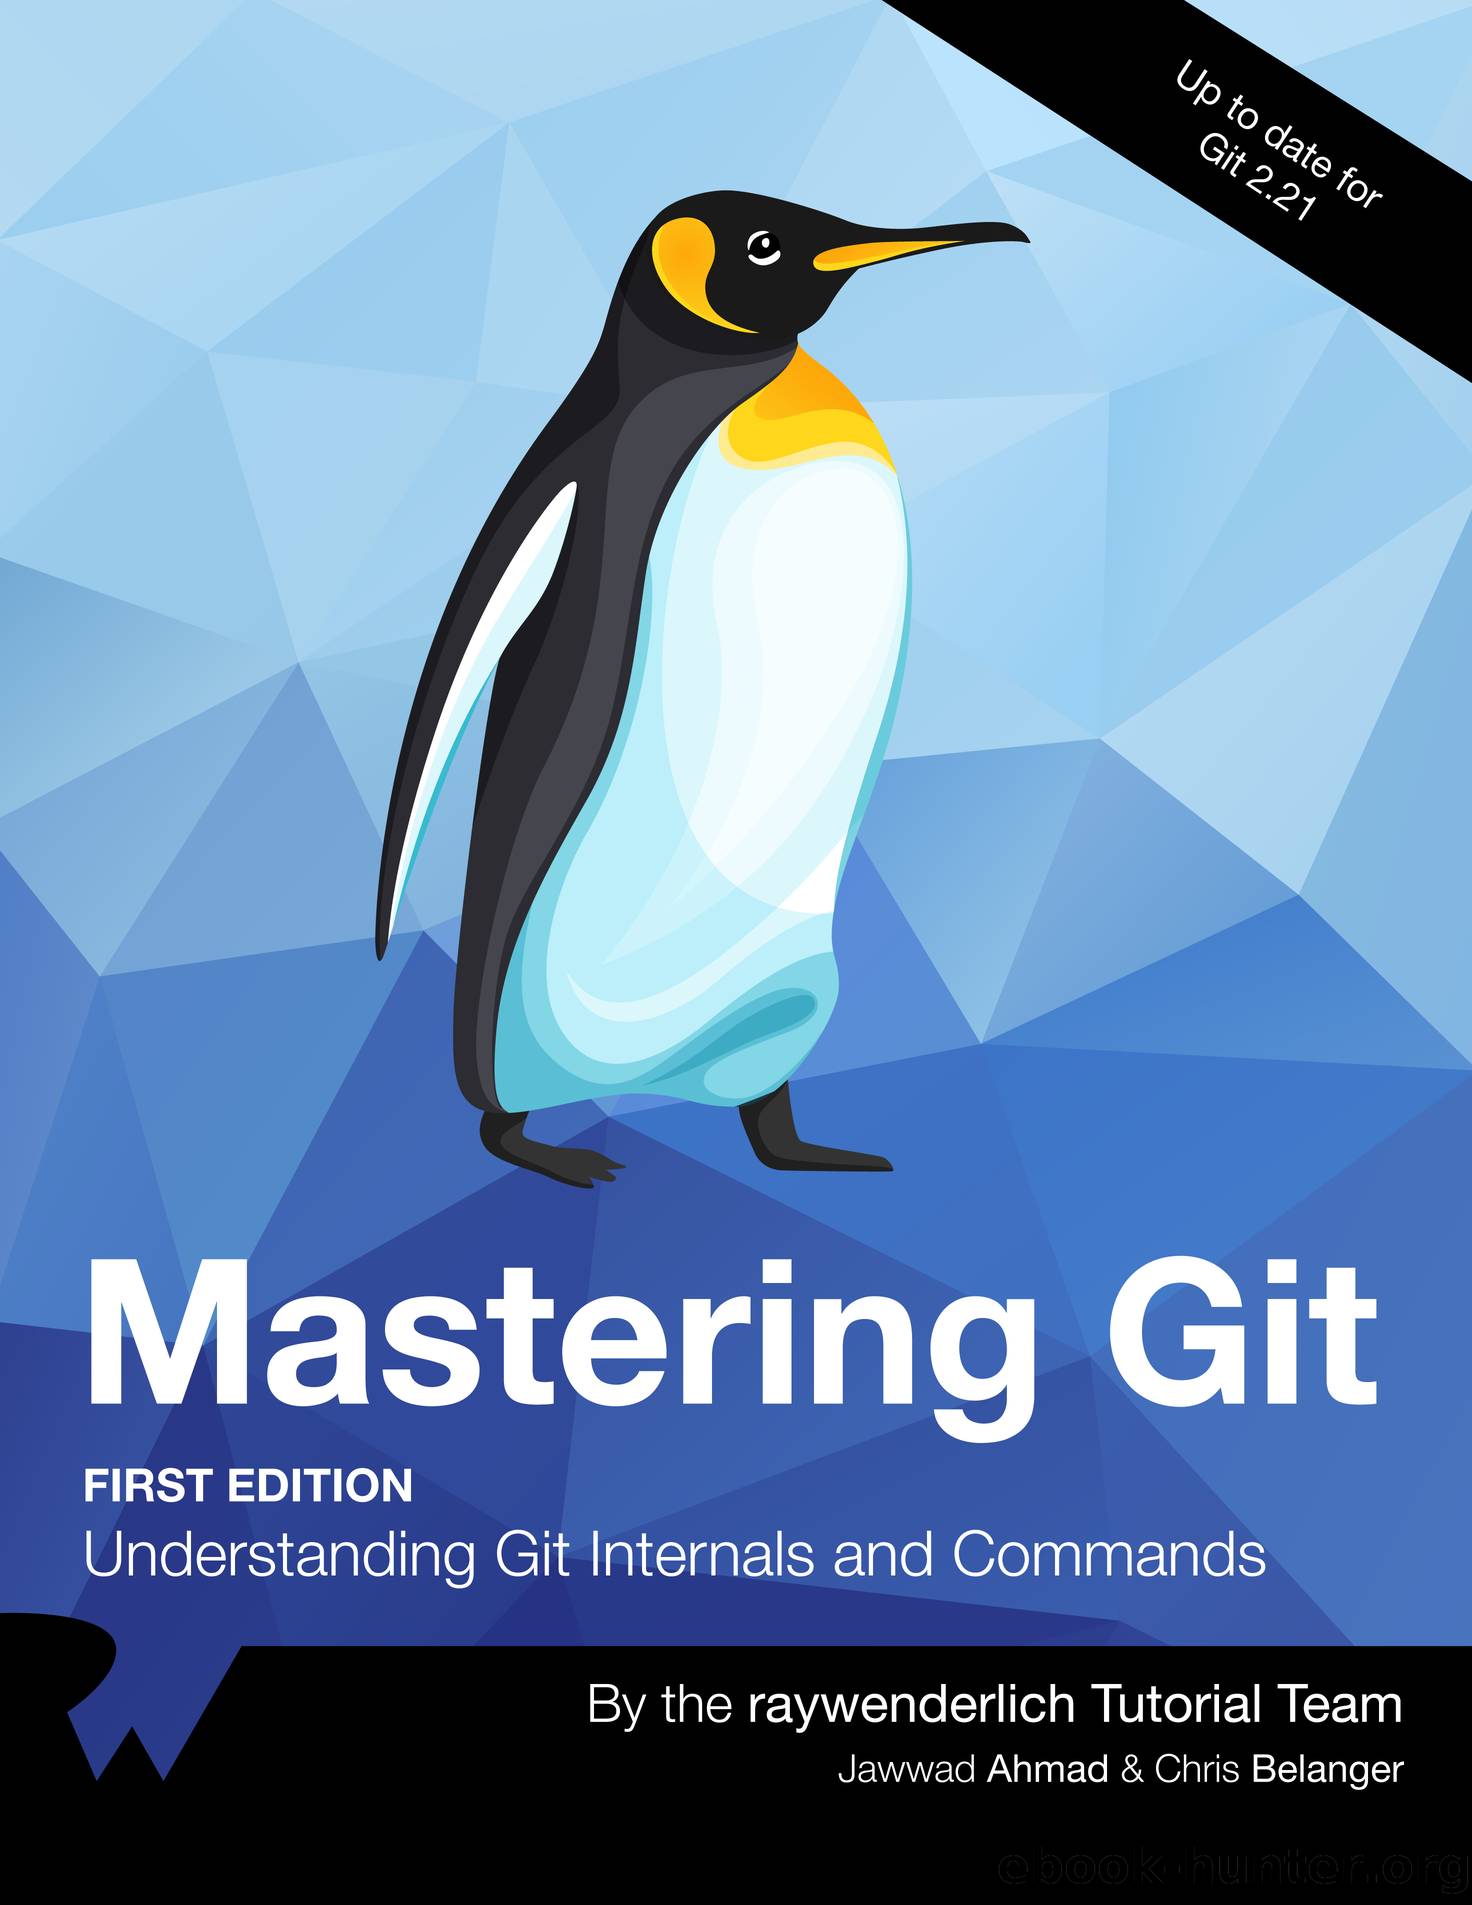 Mastering Git by By Chris Belanger & Jawwad Ahmad